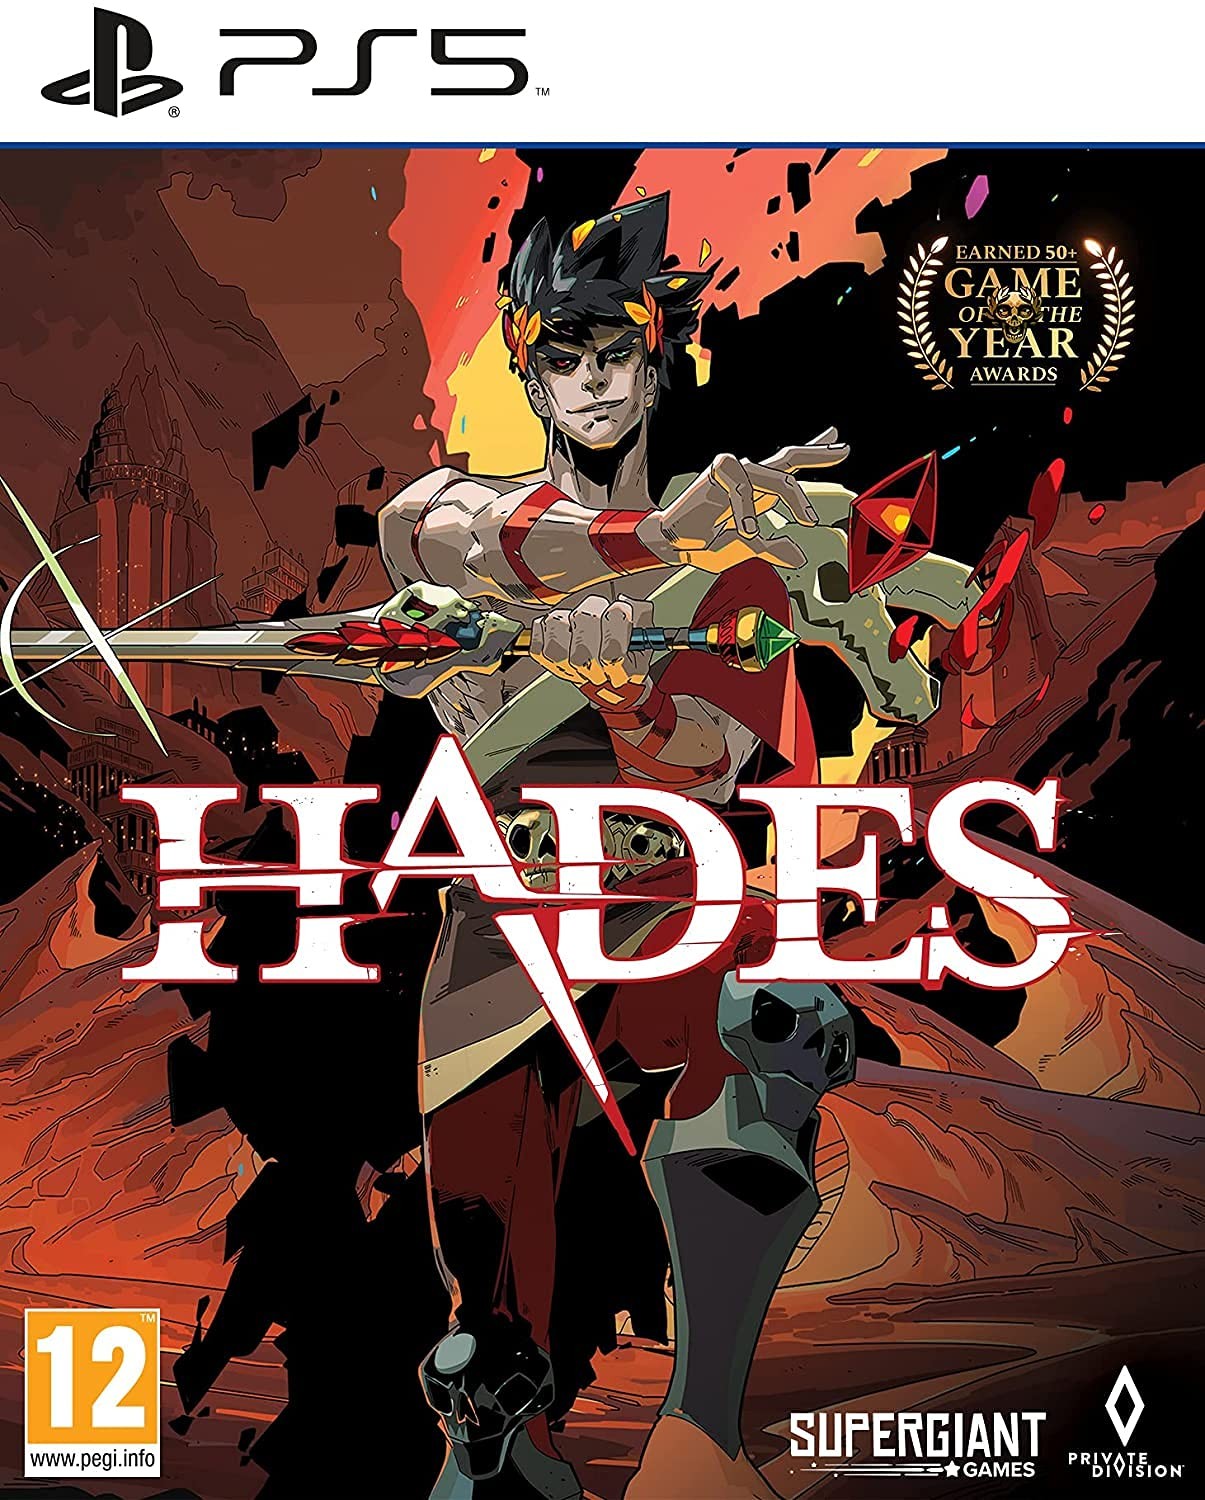 CD PS5 Hades Supergiant